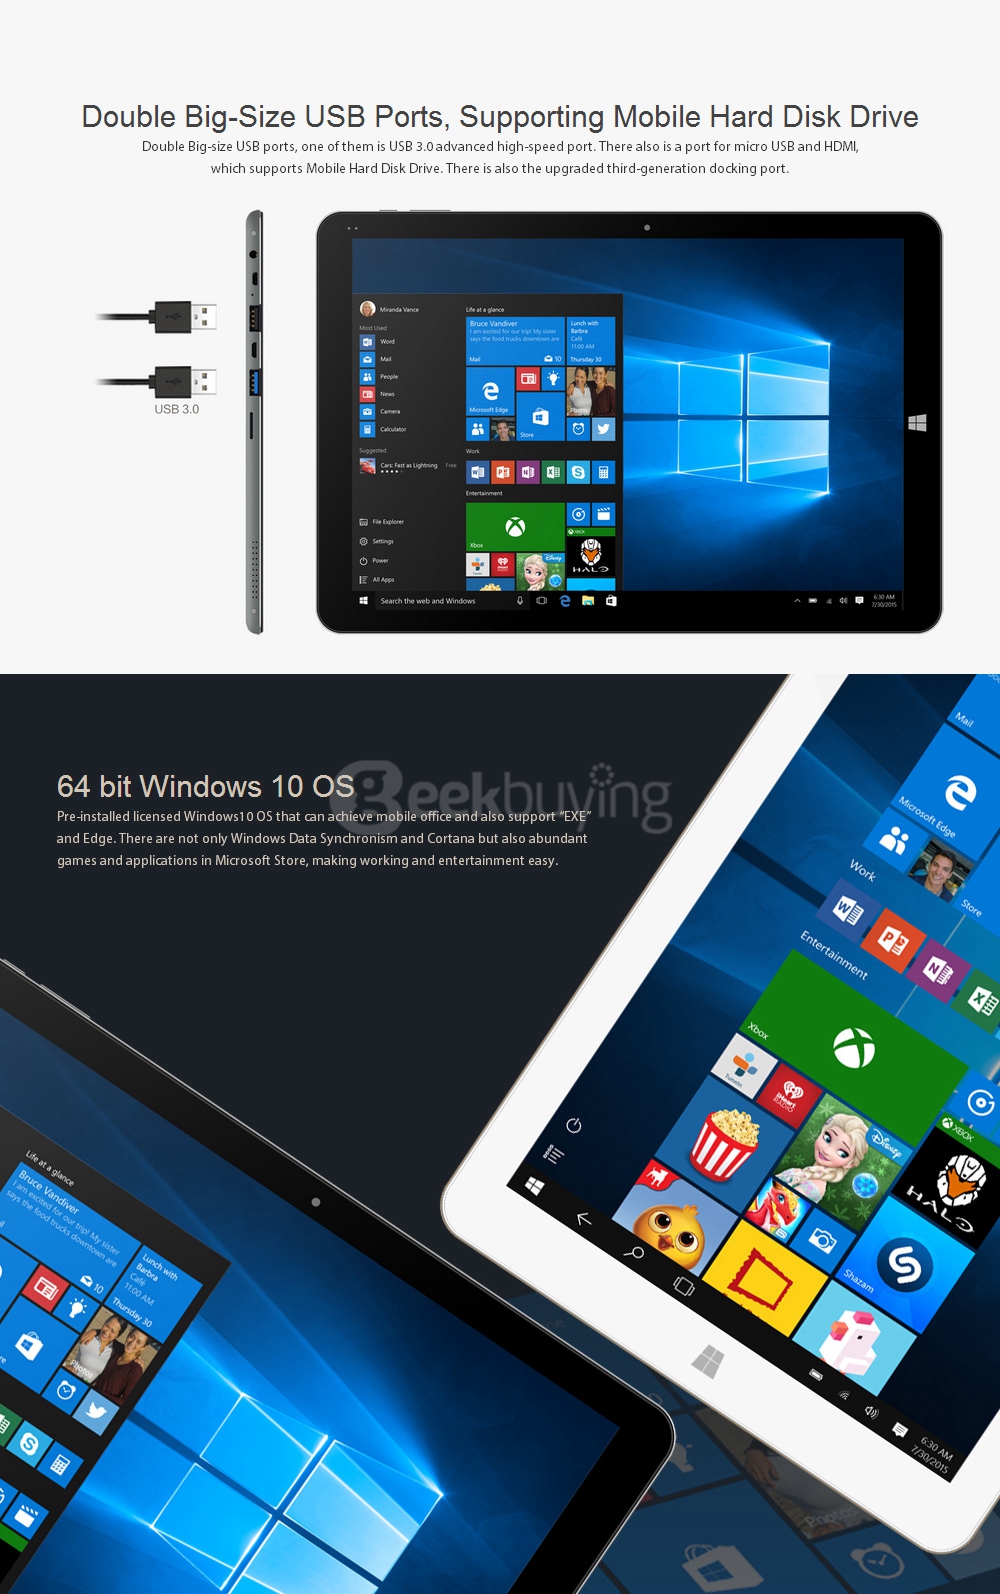 CHUWI Hi12 12 inch Intel Cherry Trail Z8300 Dual OS Windows10 + Android 5.1 4GB/64GB 2in1 Ultrabook Tablet PC Quad Core 1.84GHz IPS 2160*1440 - Gray